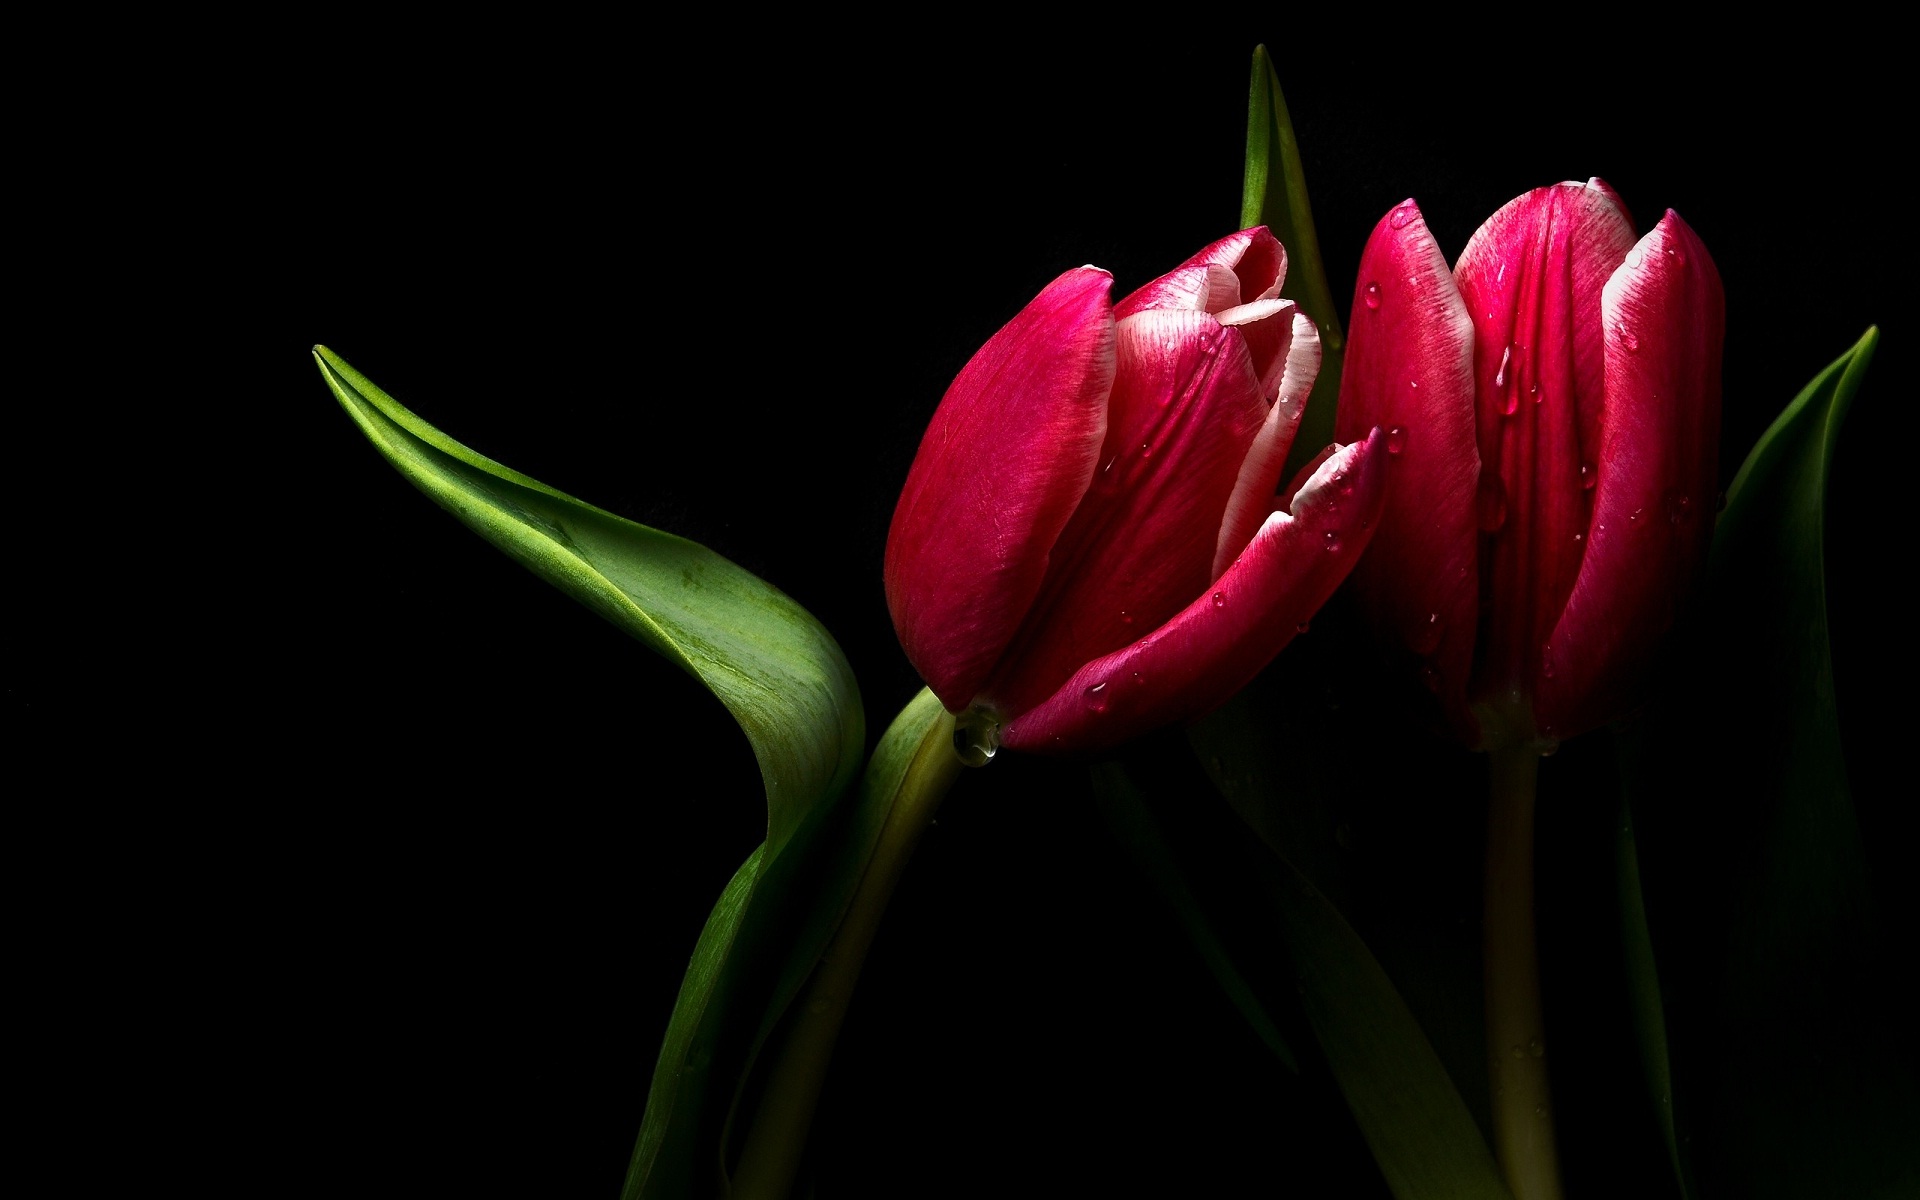 http://www.jkahir.com/wp-content/uploads/2017/11/Red-Tulip-And-Green-Leaves-On-Black-Nature.jpg